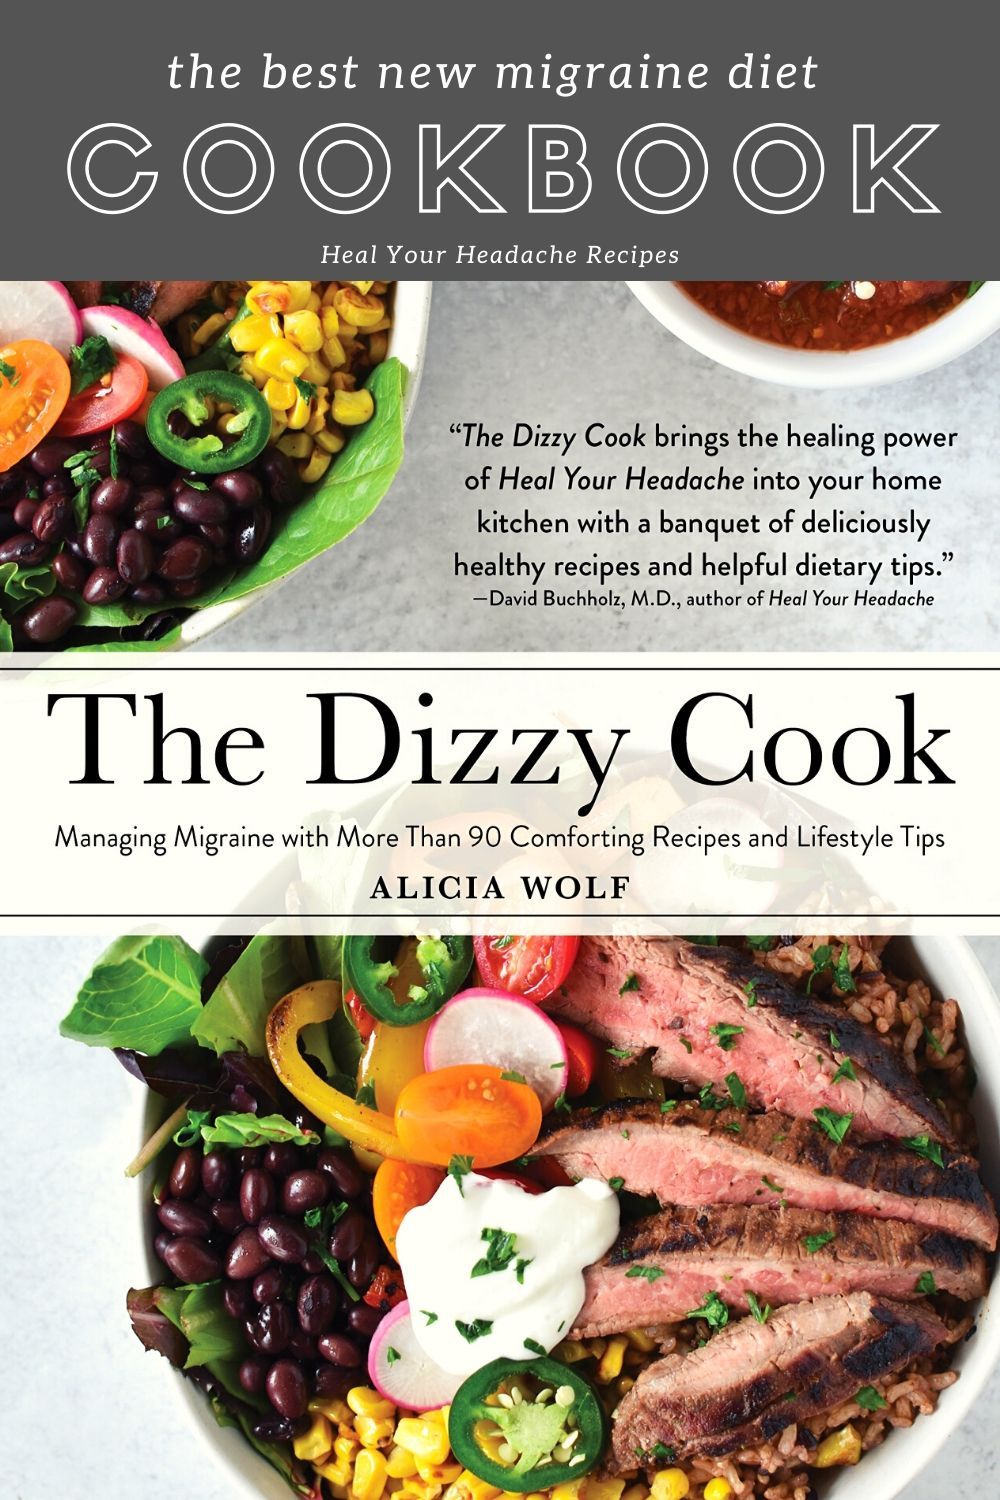 A new cookbook from The Dizzy Cook with Heal Your Headache ...